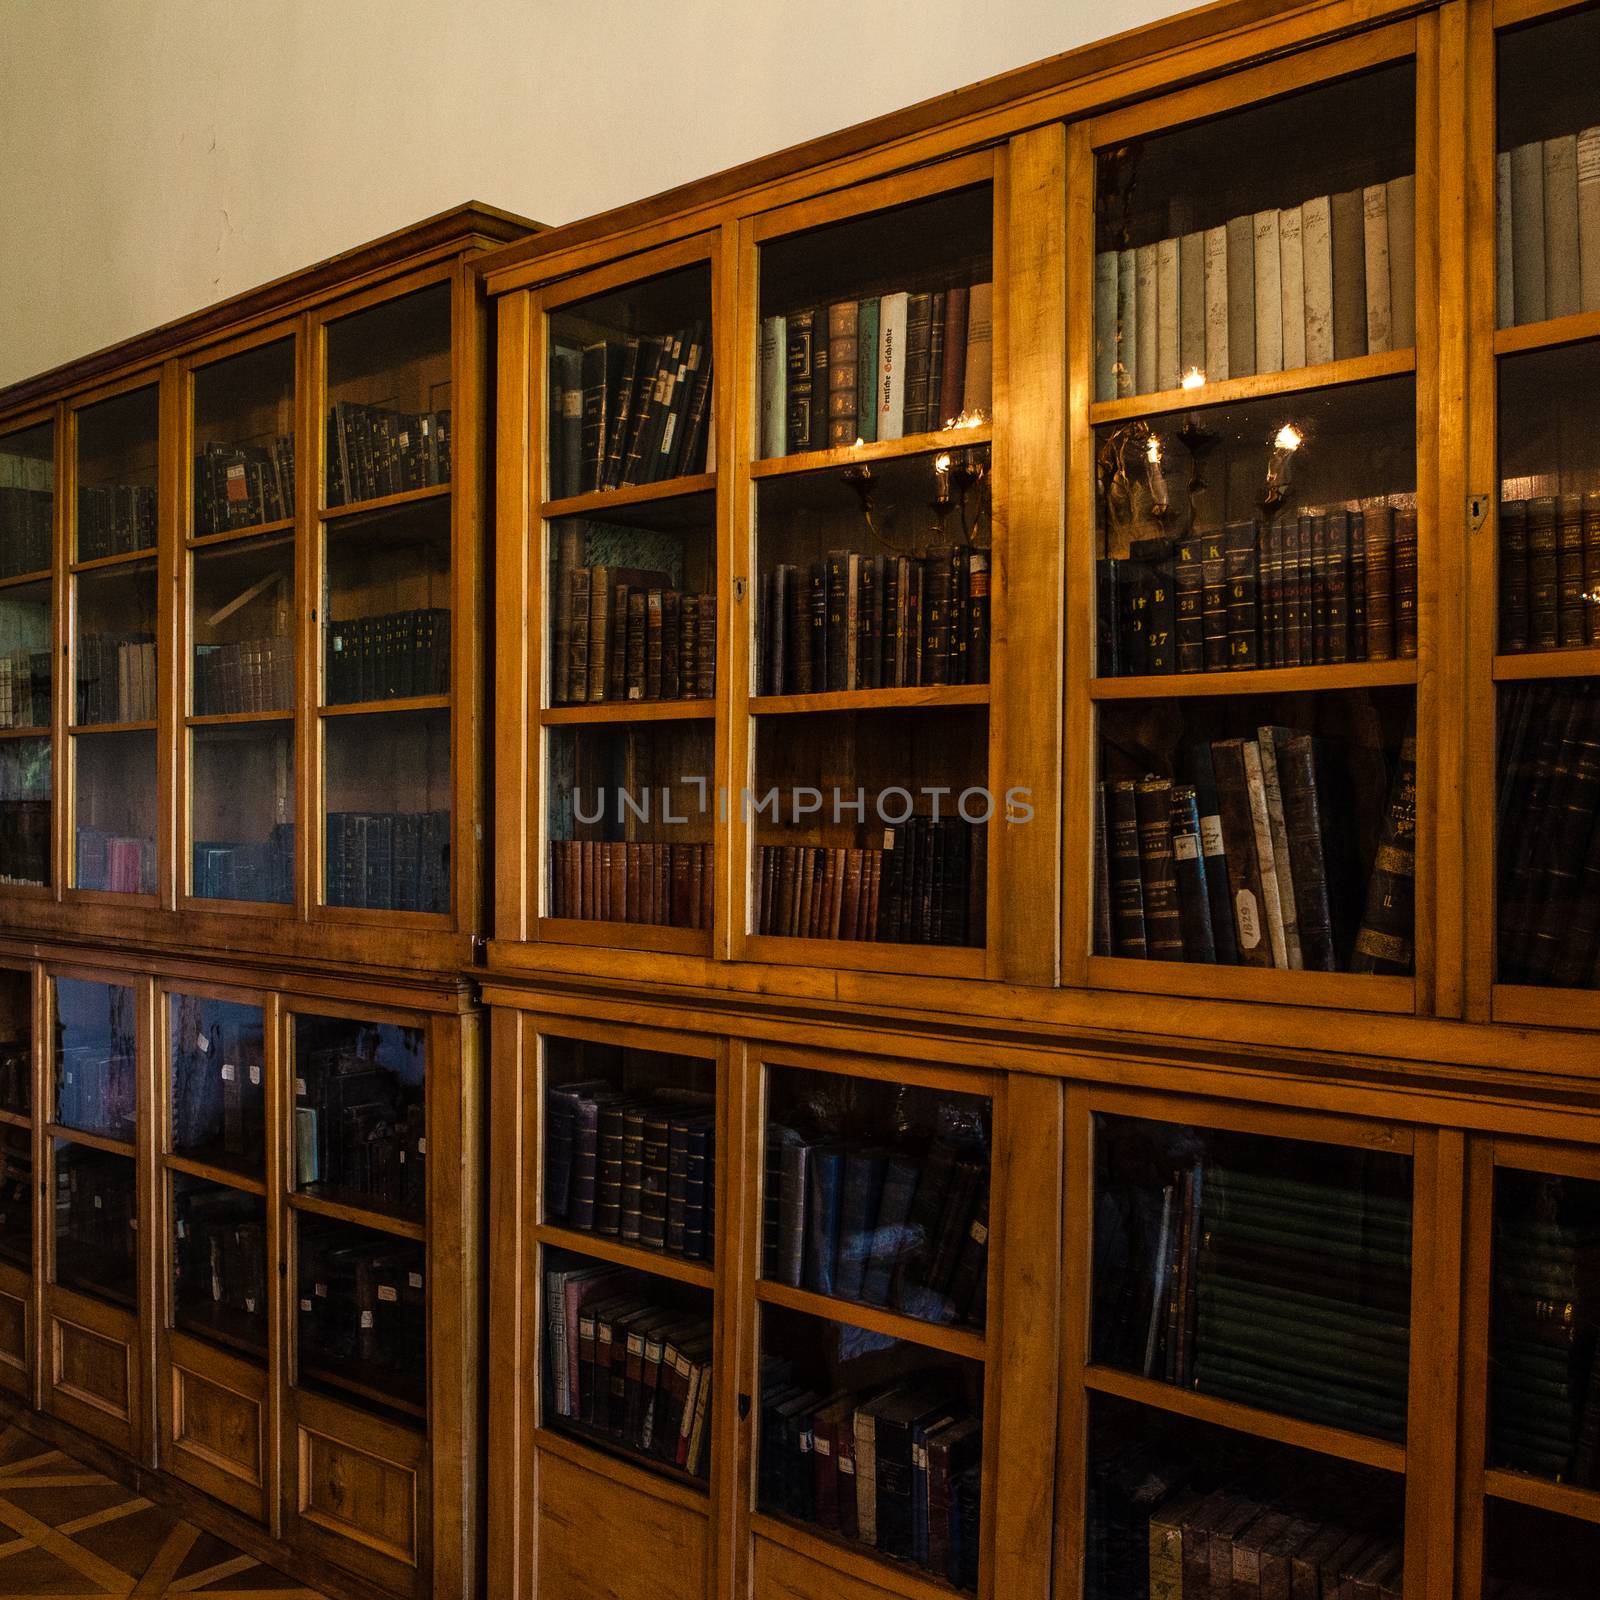 Old books in a wooden row library